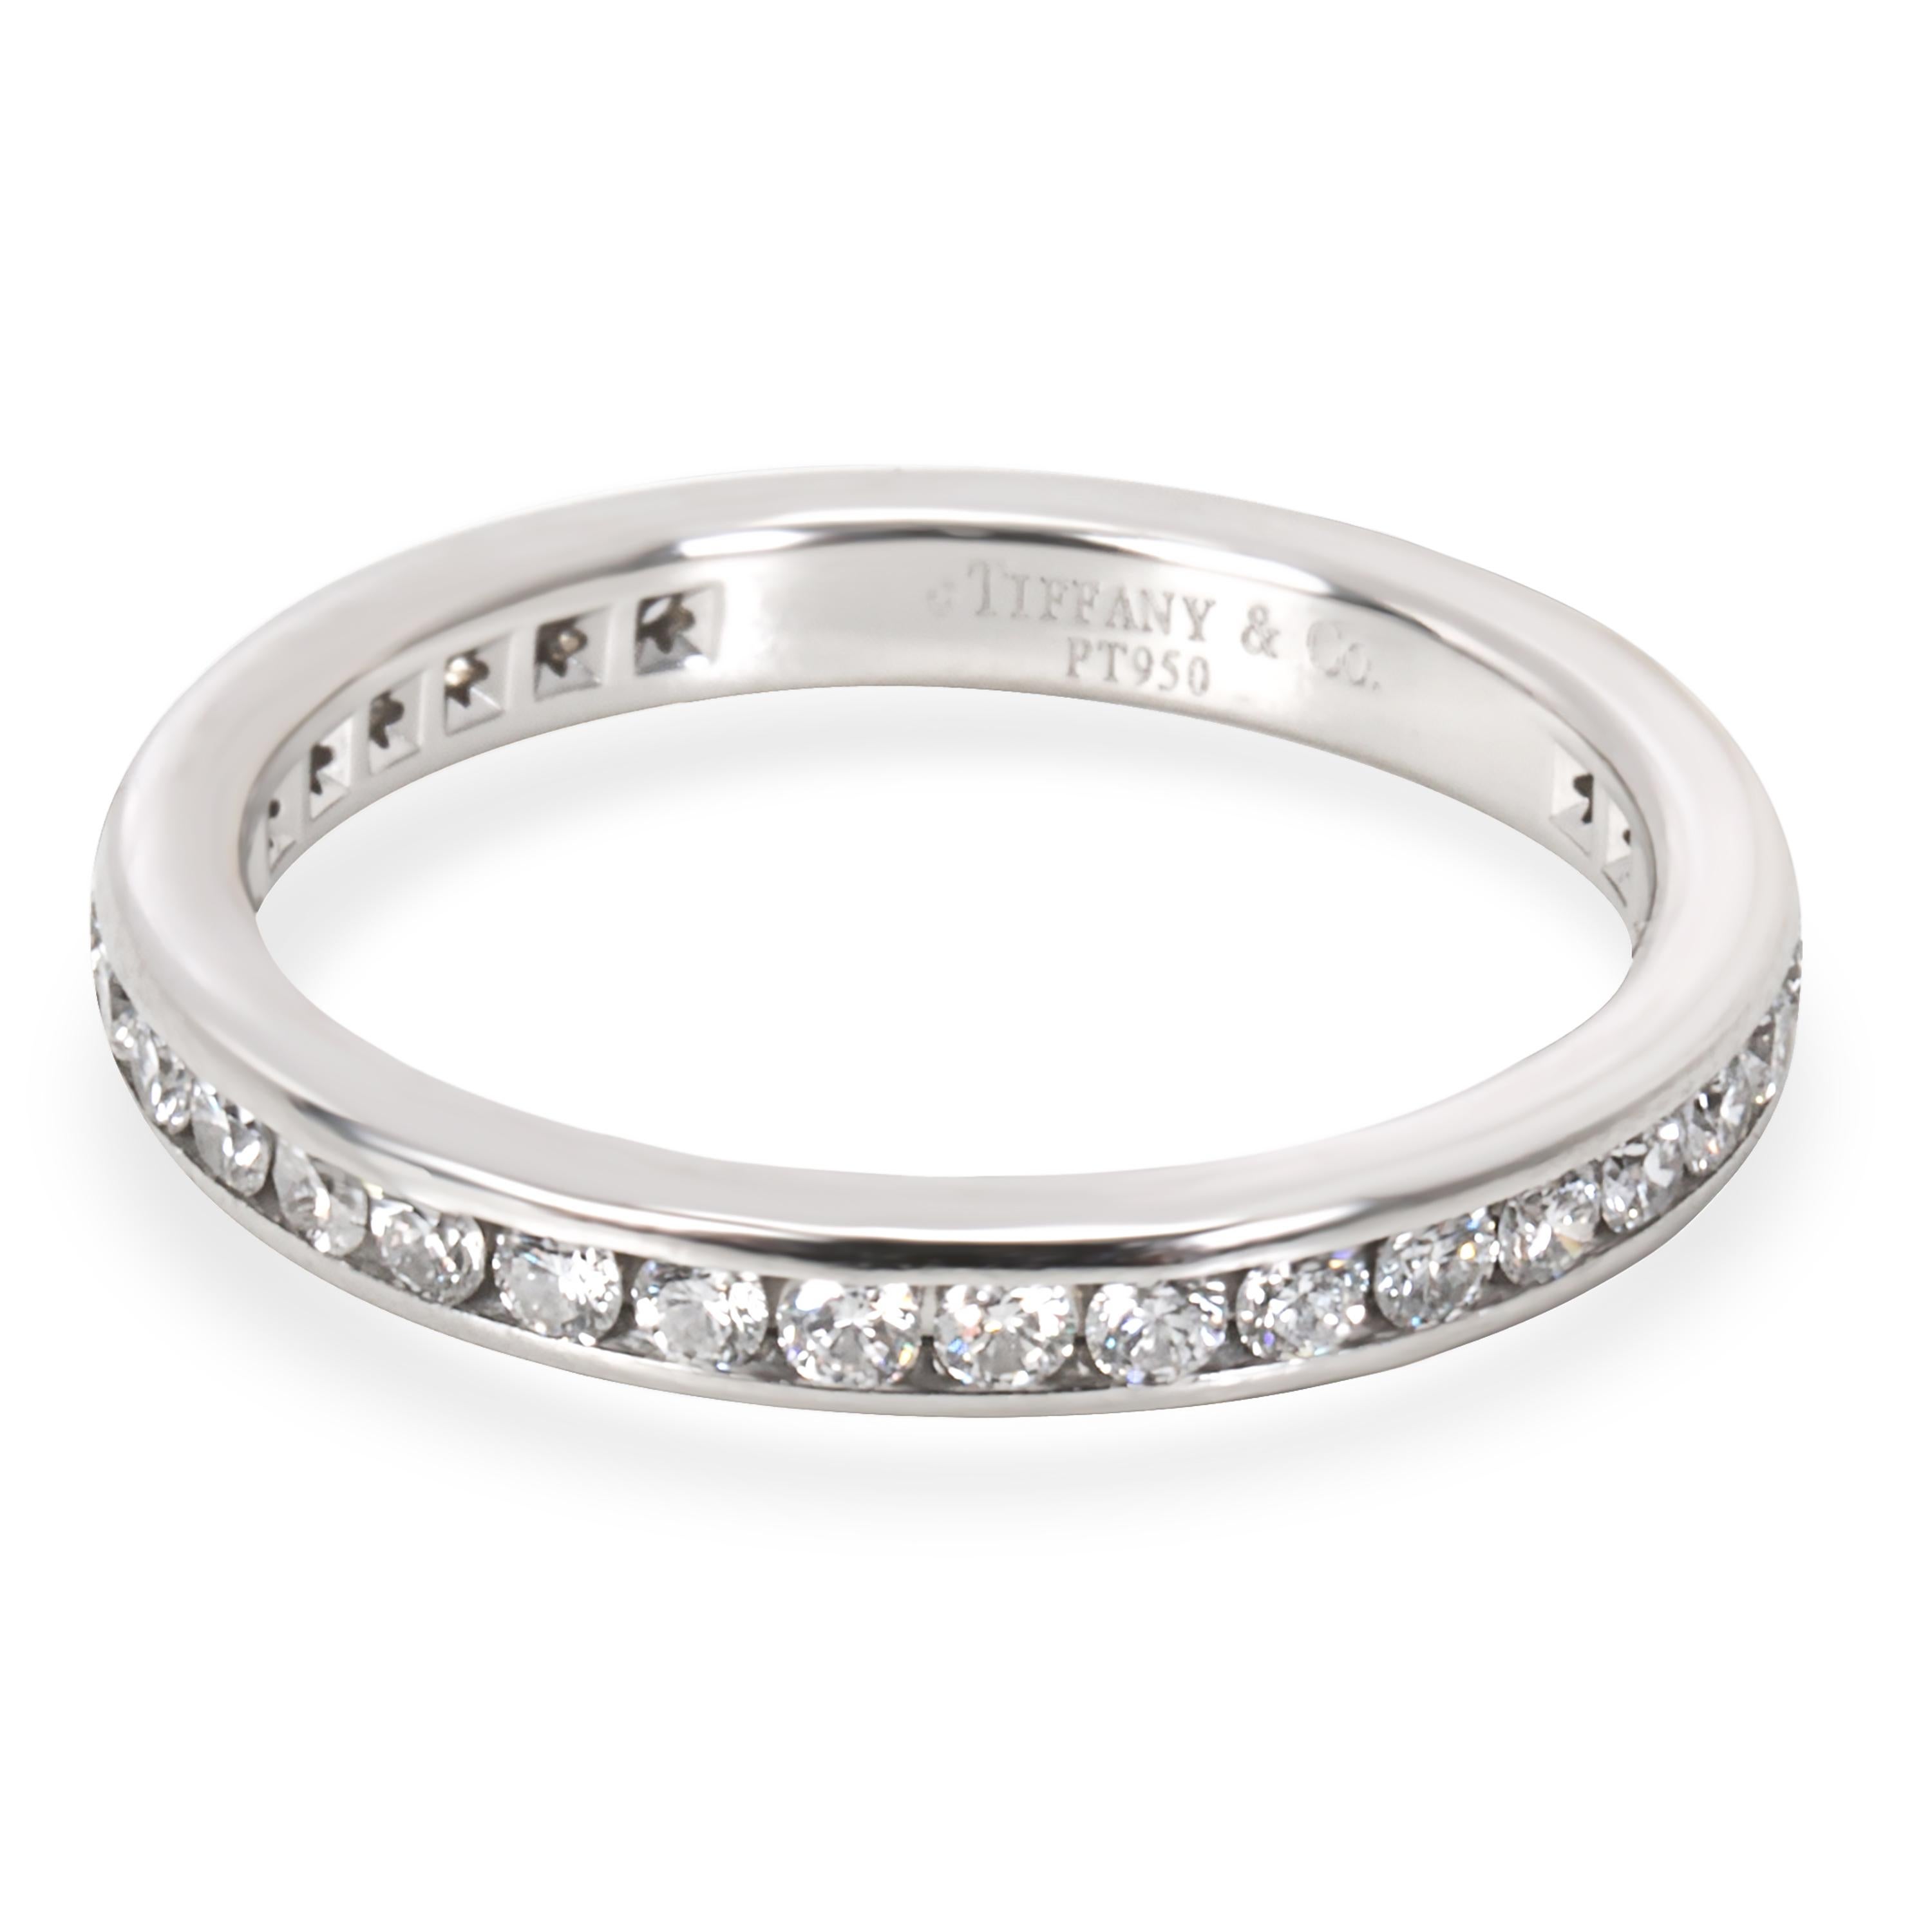 Tiffany & Co. Channel Diamond Wedding Band in Platinum (0.40 CTW)

PRIMARY DETAILS
SKU: 096098
Listing Title: Tiffany & Co. Channel Diamond Wedding Band in Platinum (0.40 CTW)
Condition Description: Retail price 3,475 USD. In excellent condition and